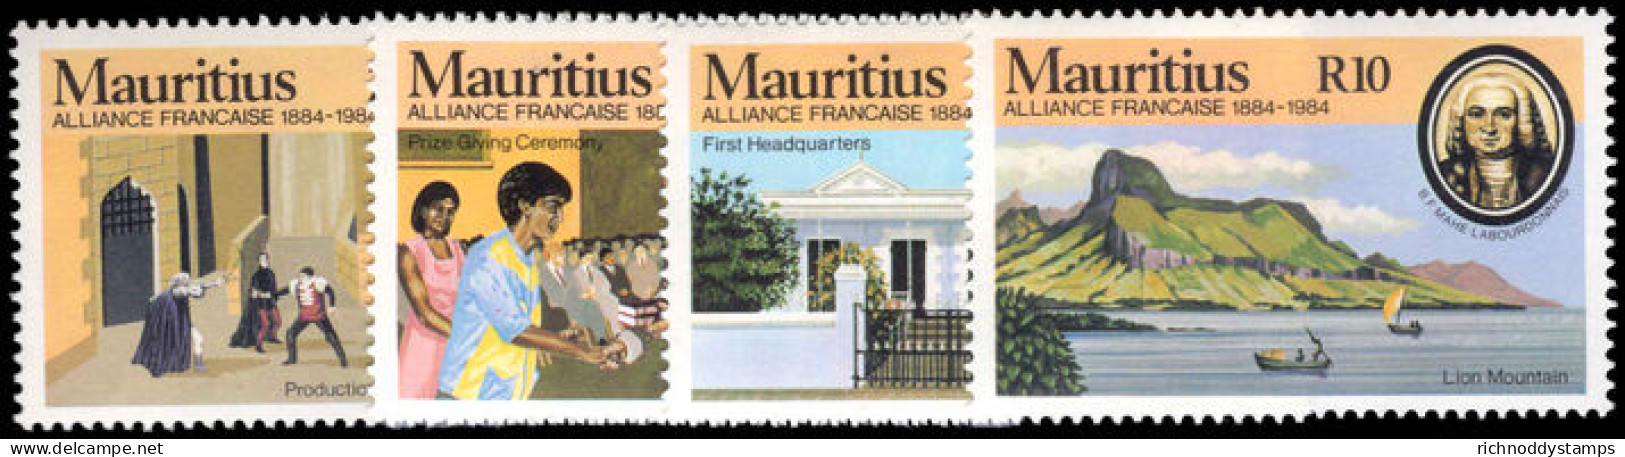 Mauritius 1984 Centenary Of Alliance Francaise Unmounted Mint. - Maurice (1968-...)